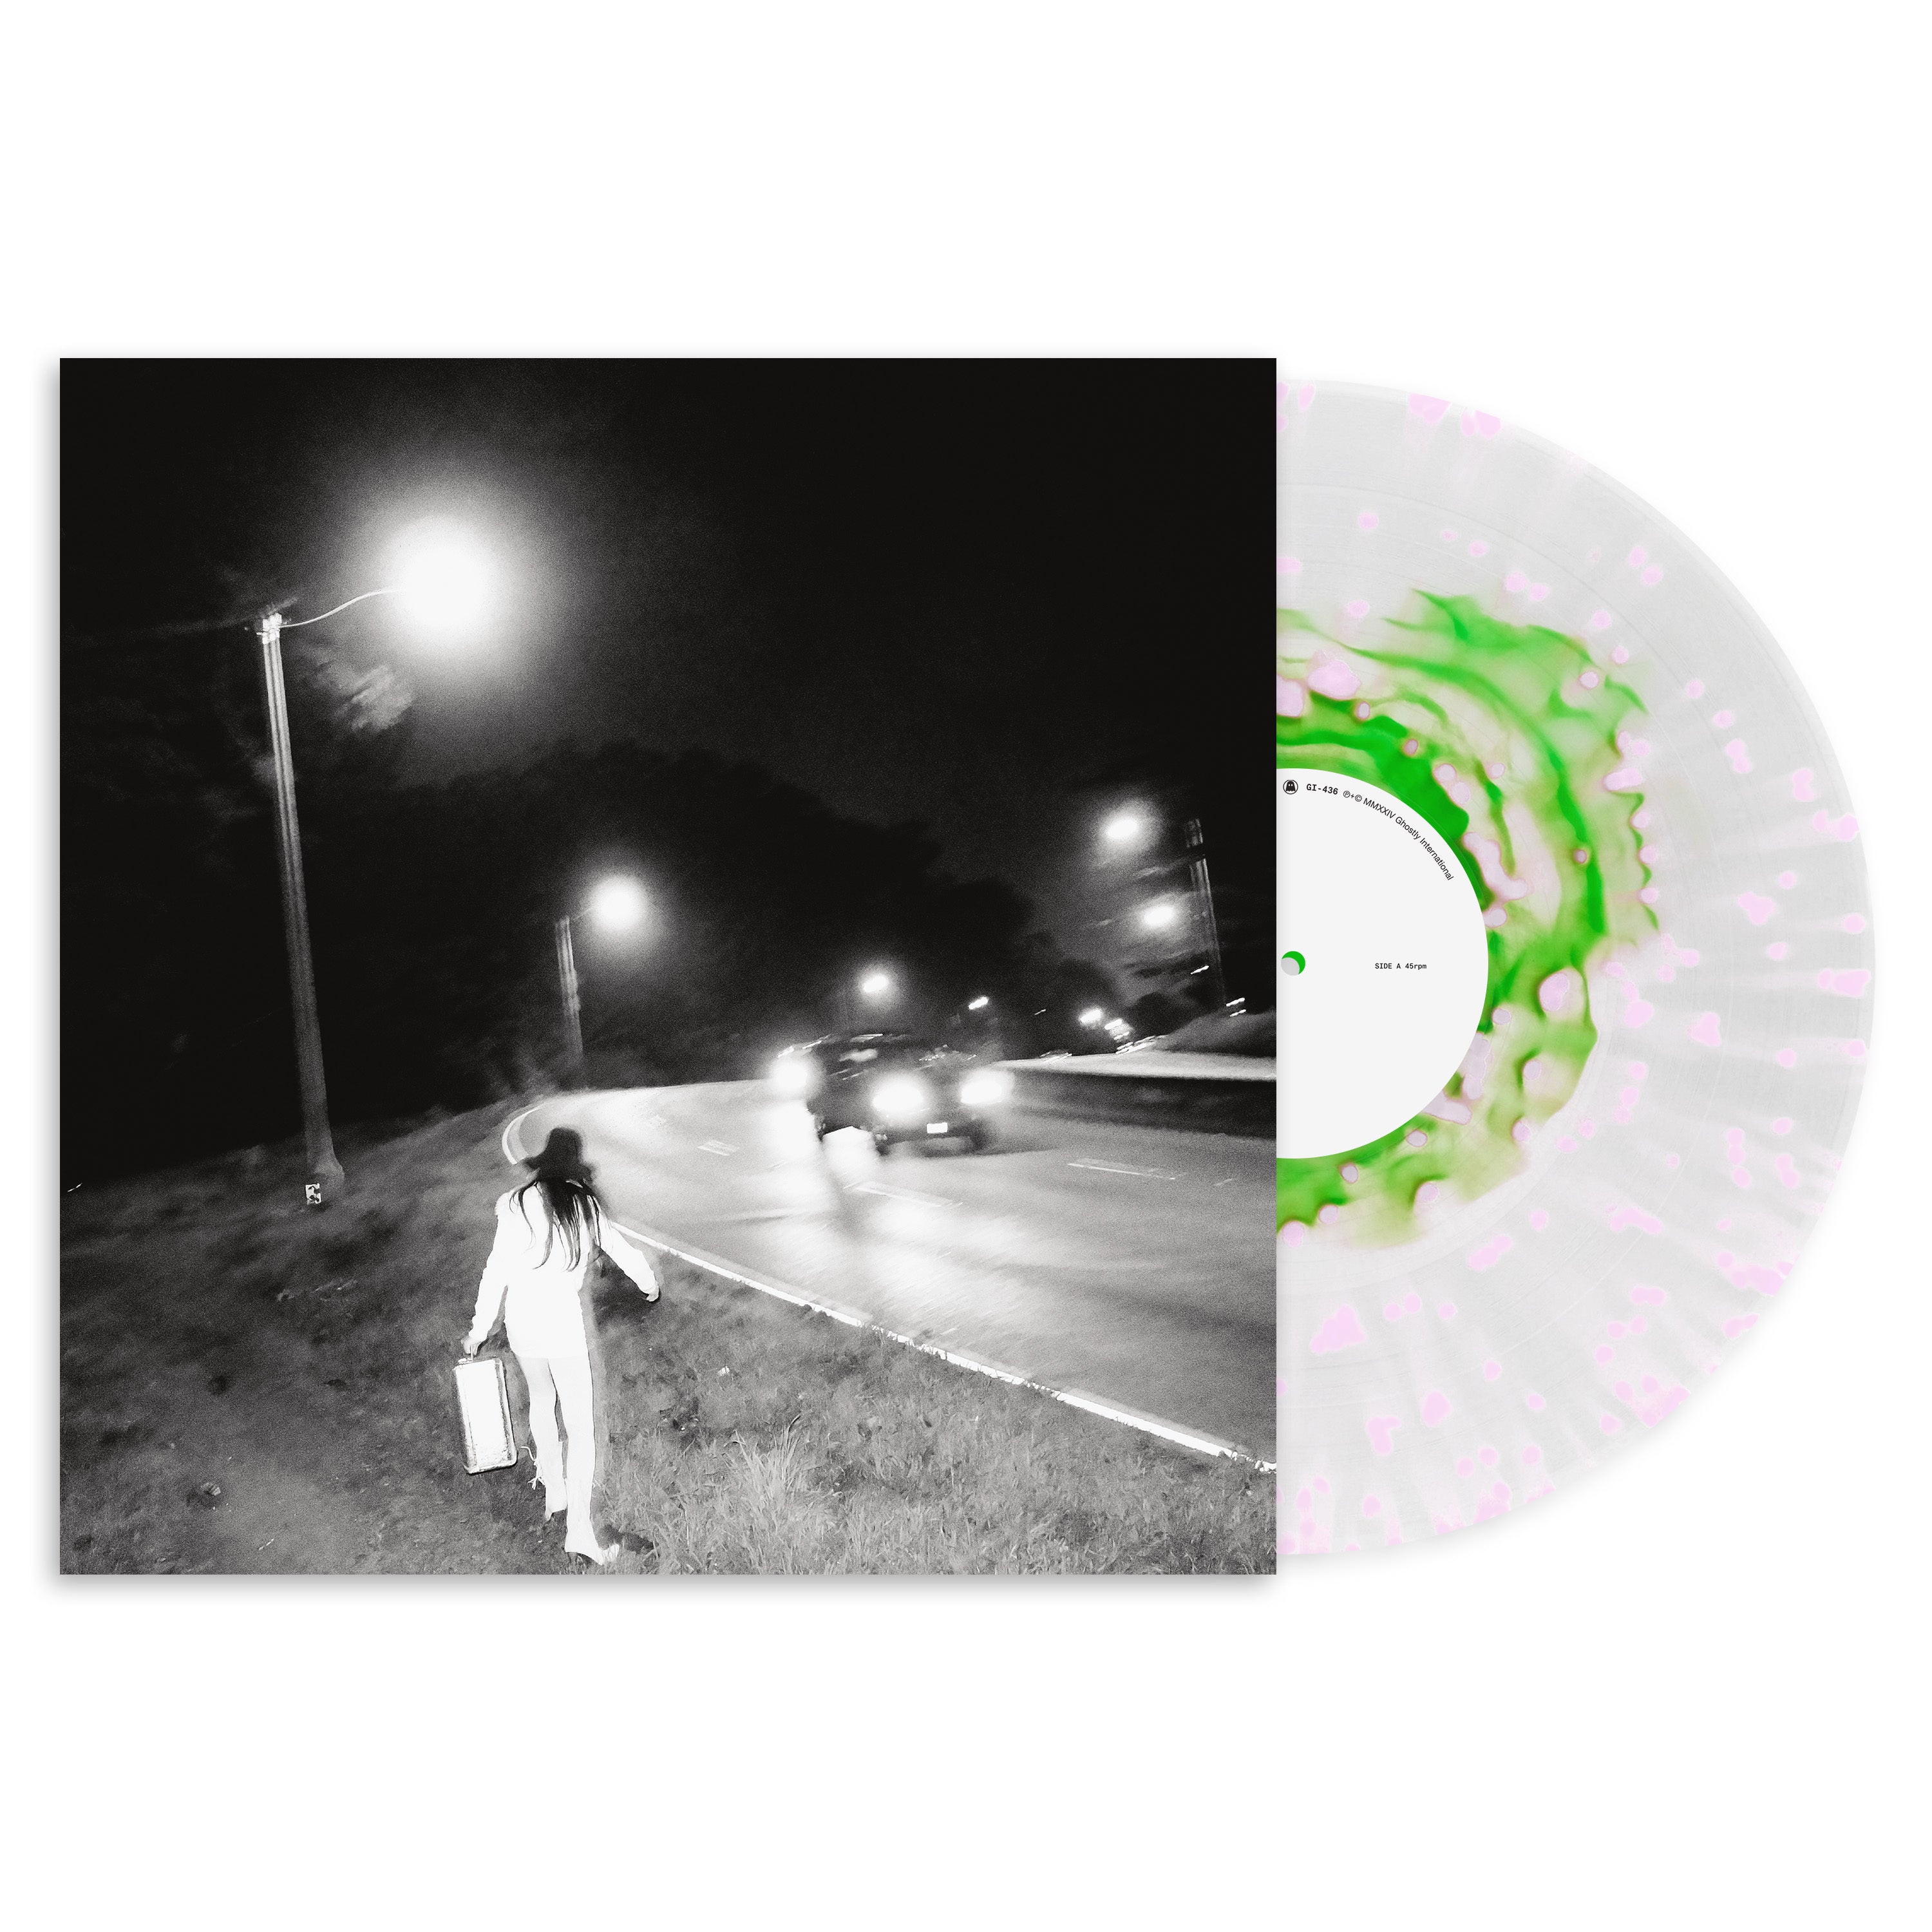 Crushed - Extra Life: Limited 'Poisonbloom' (Clear + Green With Pink Splatter) Vinyl 12" EP